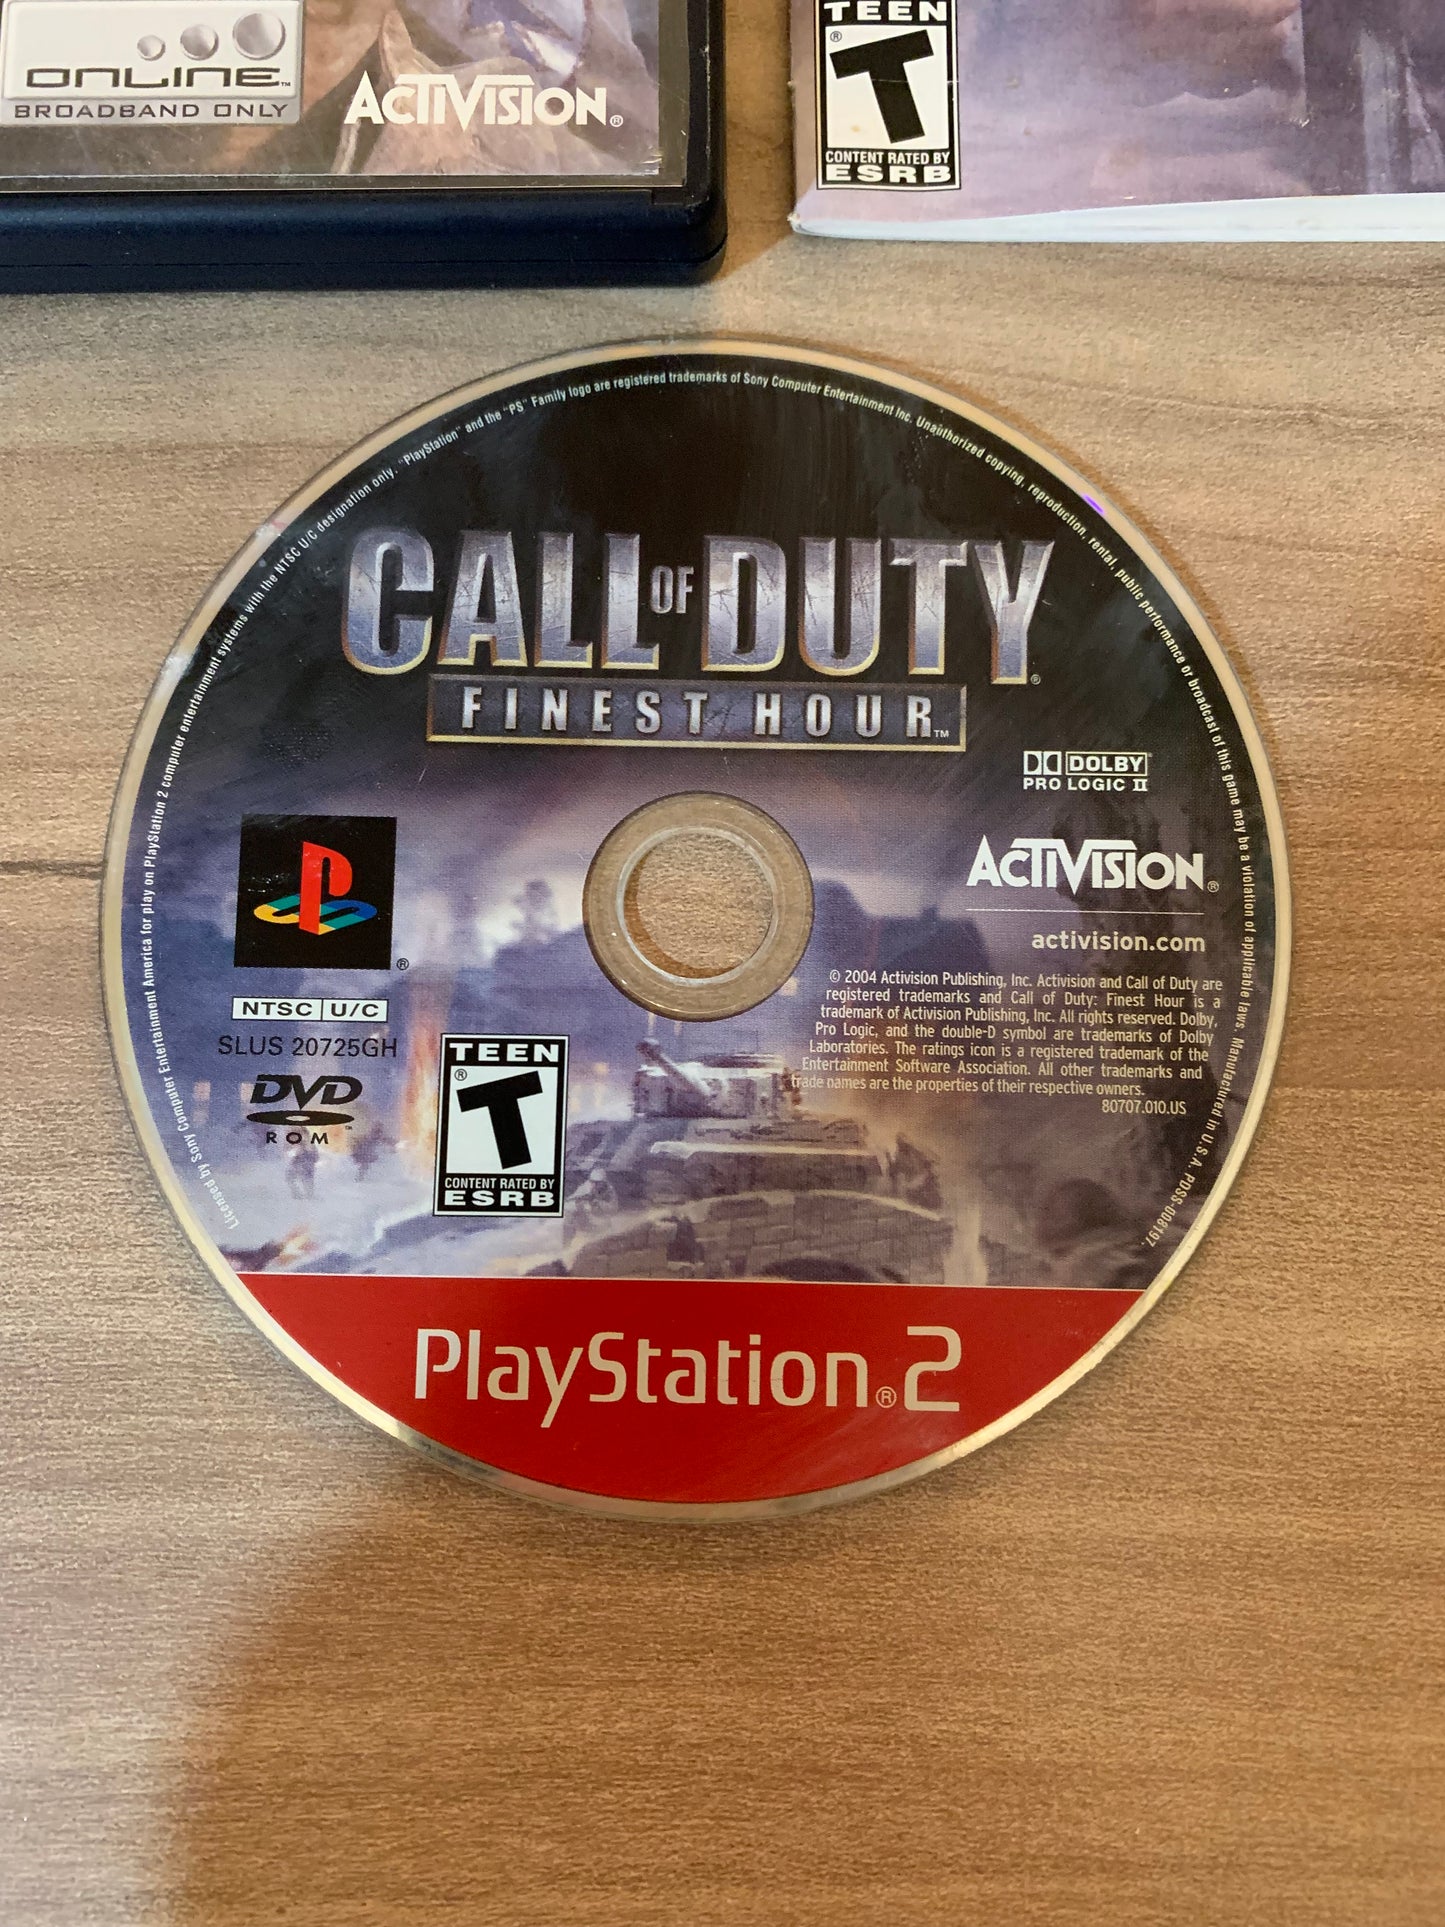 SONY PLAYSTATiON 2 [PS2] | CALL OF DUTY FiNEST HOUR | GREATEST HiTS